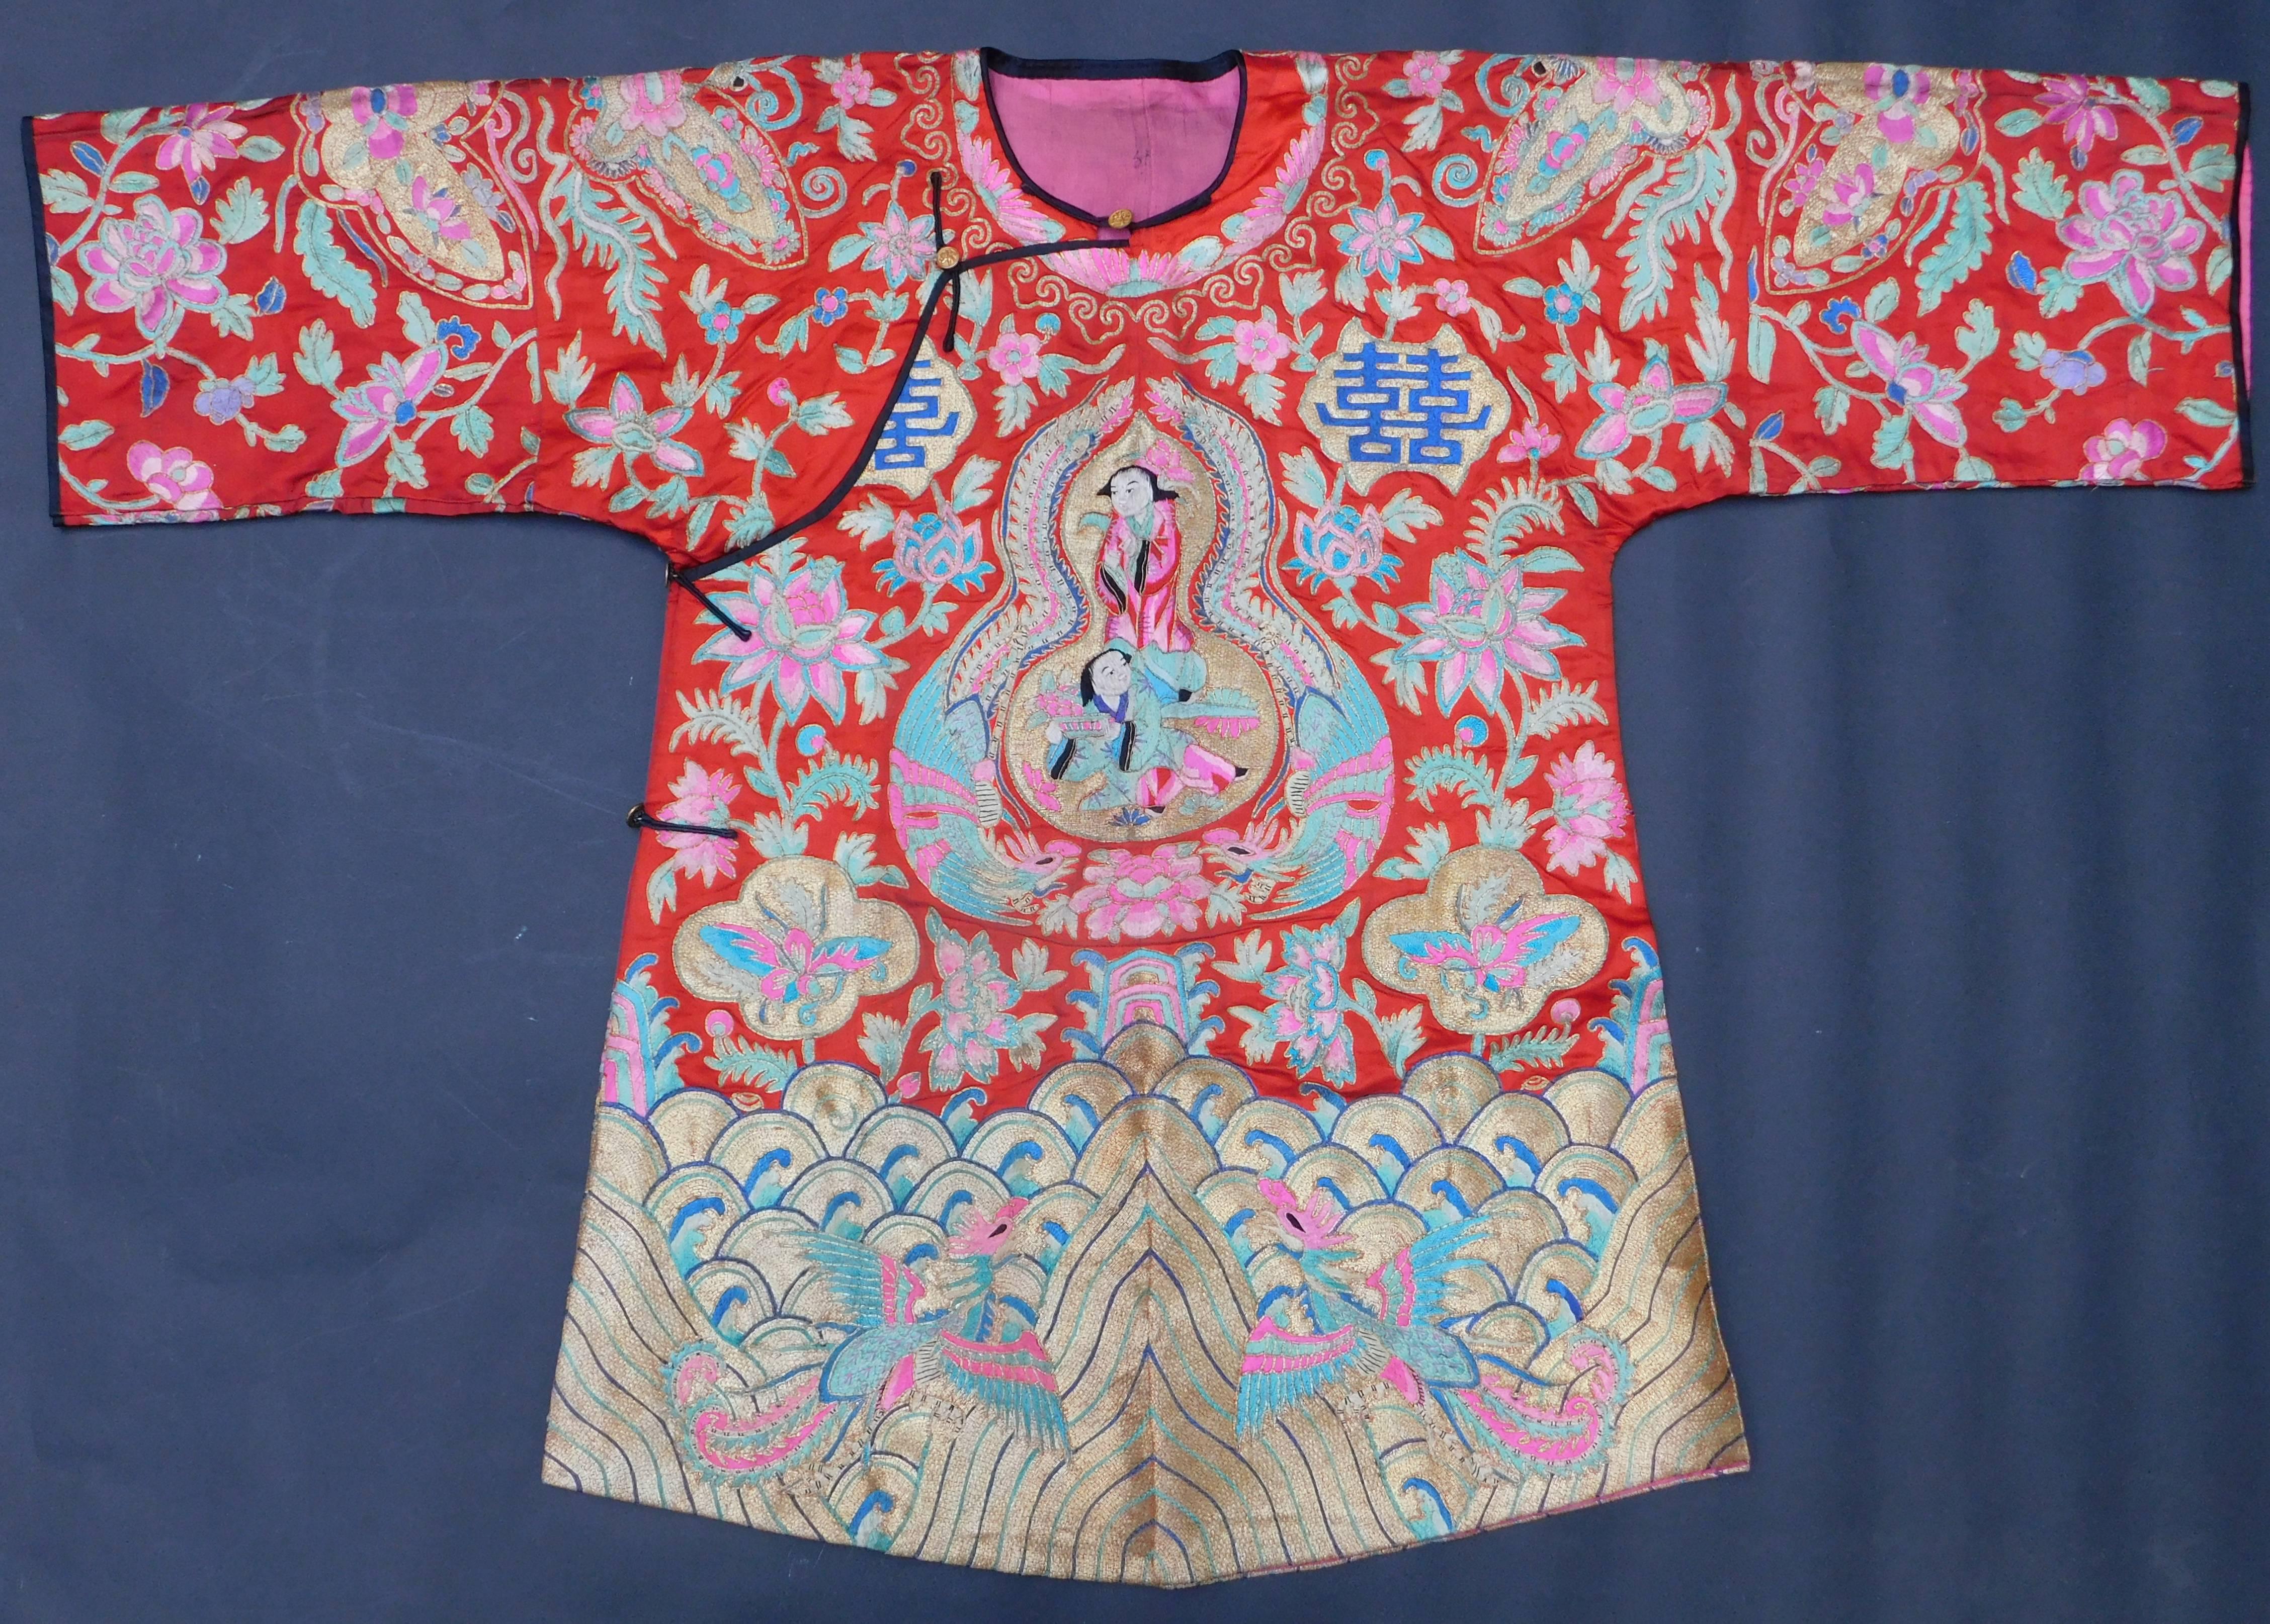 A rare Chinese silk two piece wedding robe and pants set with ornate overall hand embroidery, circa 1920. This is what would be worn for the sedan processional journey transporting a young bride from her home to her husband's family home. The robe